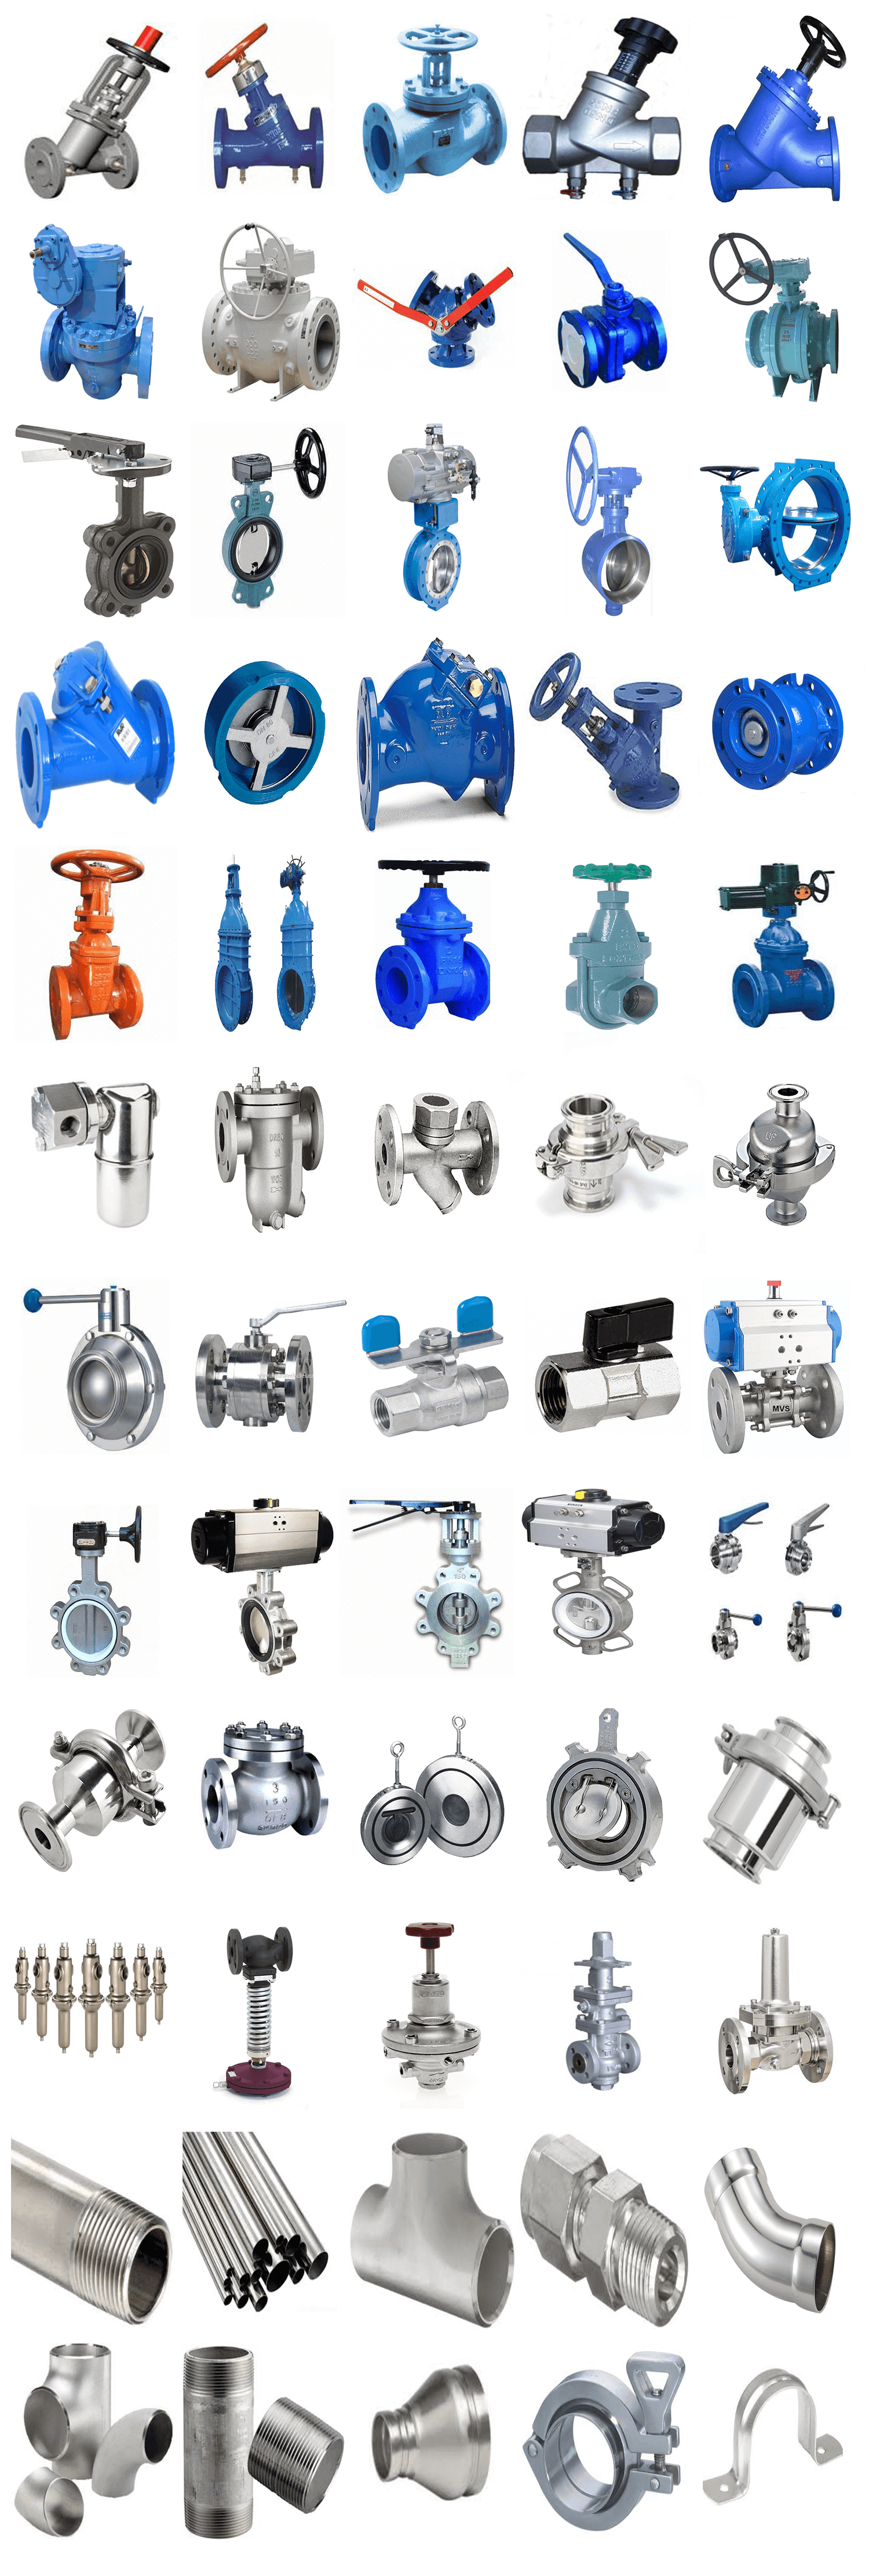 valve-and-pipe-ffittings-products-in-pakistan